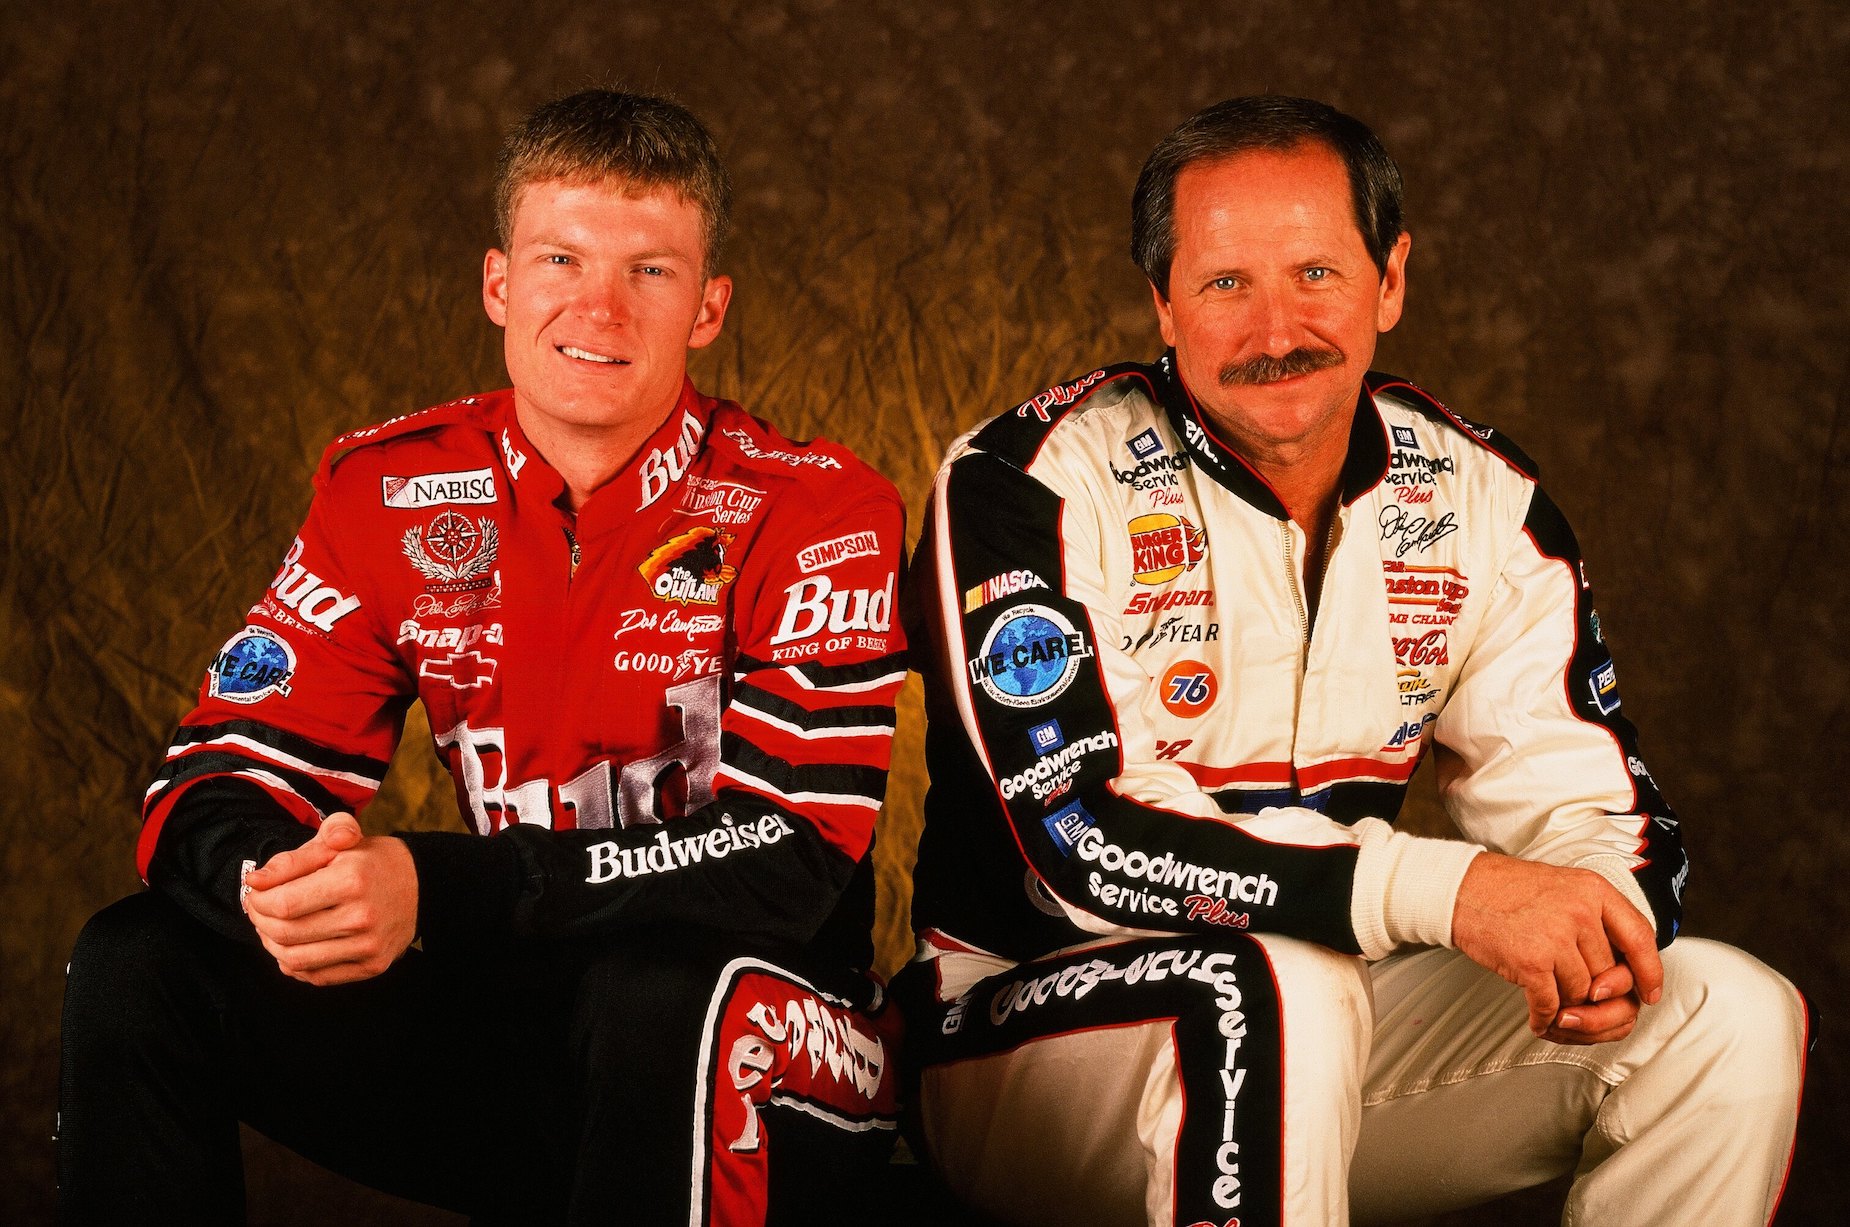 Dale Earnhardt Jr. was fired from his job at his father's car dealership.